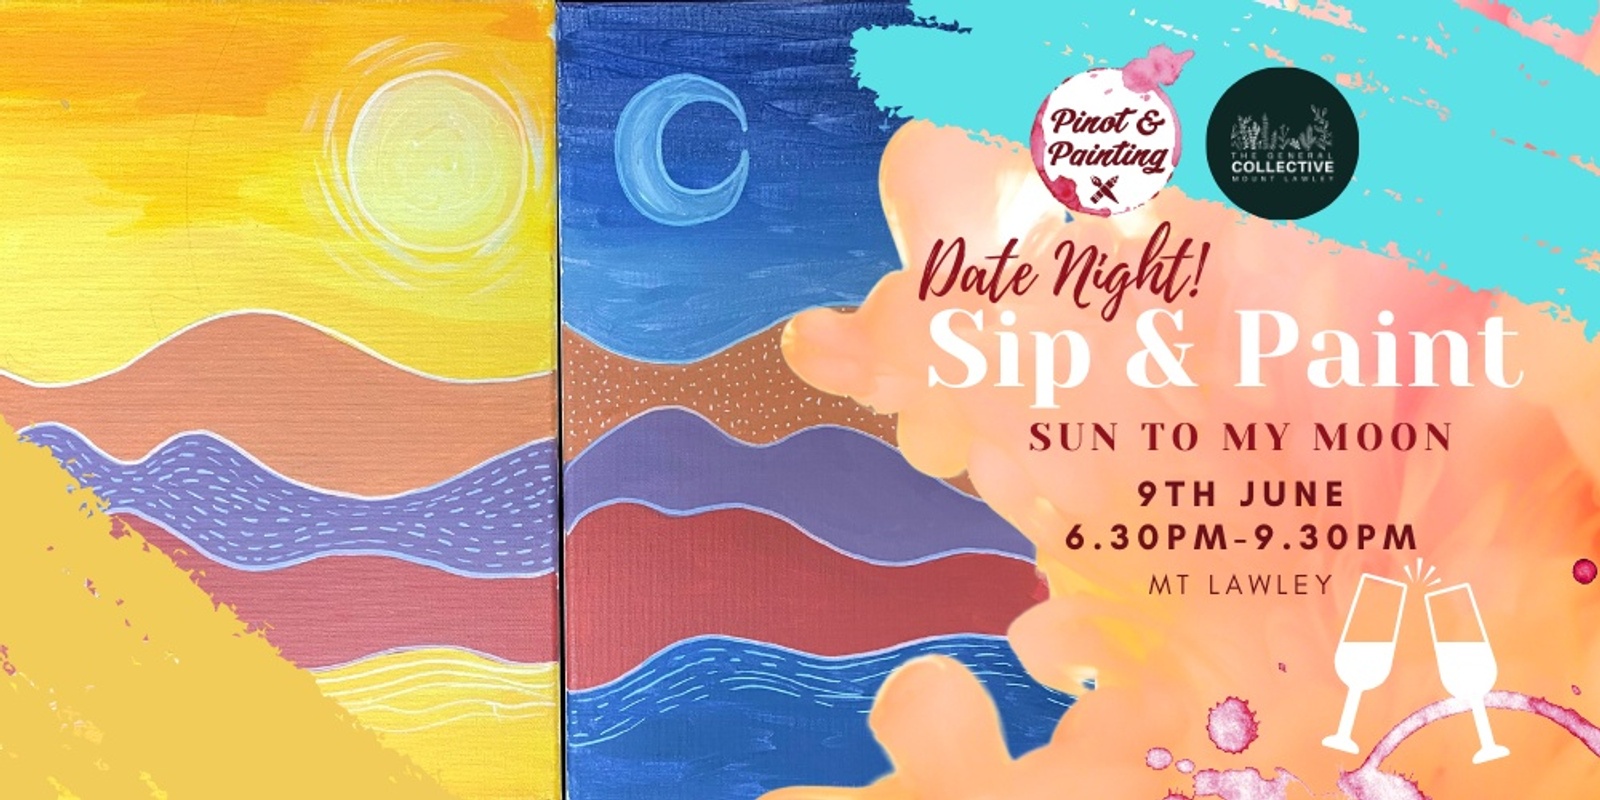 Sun to my Moon - Date Night Sip & Paint @ The General Collective